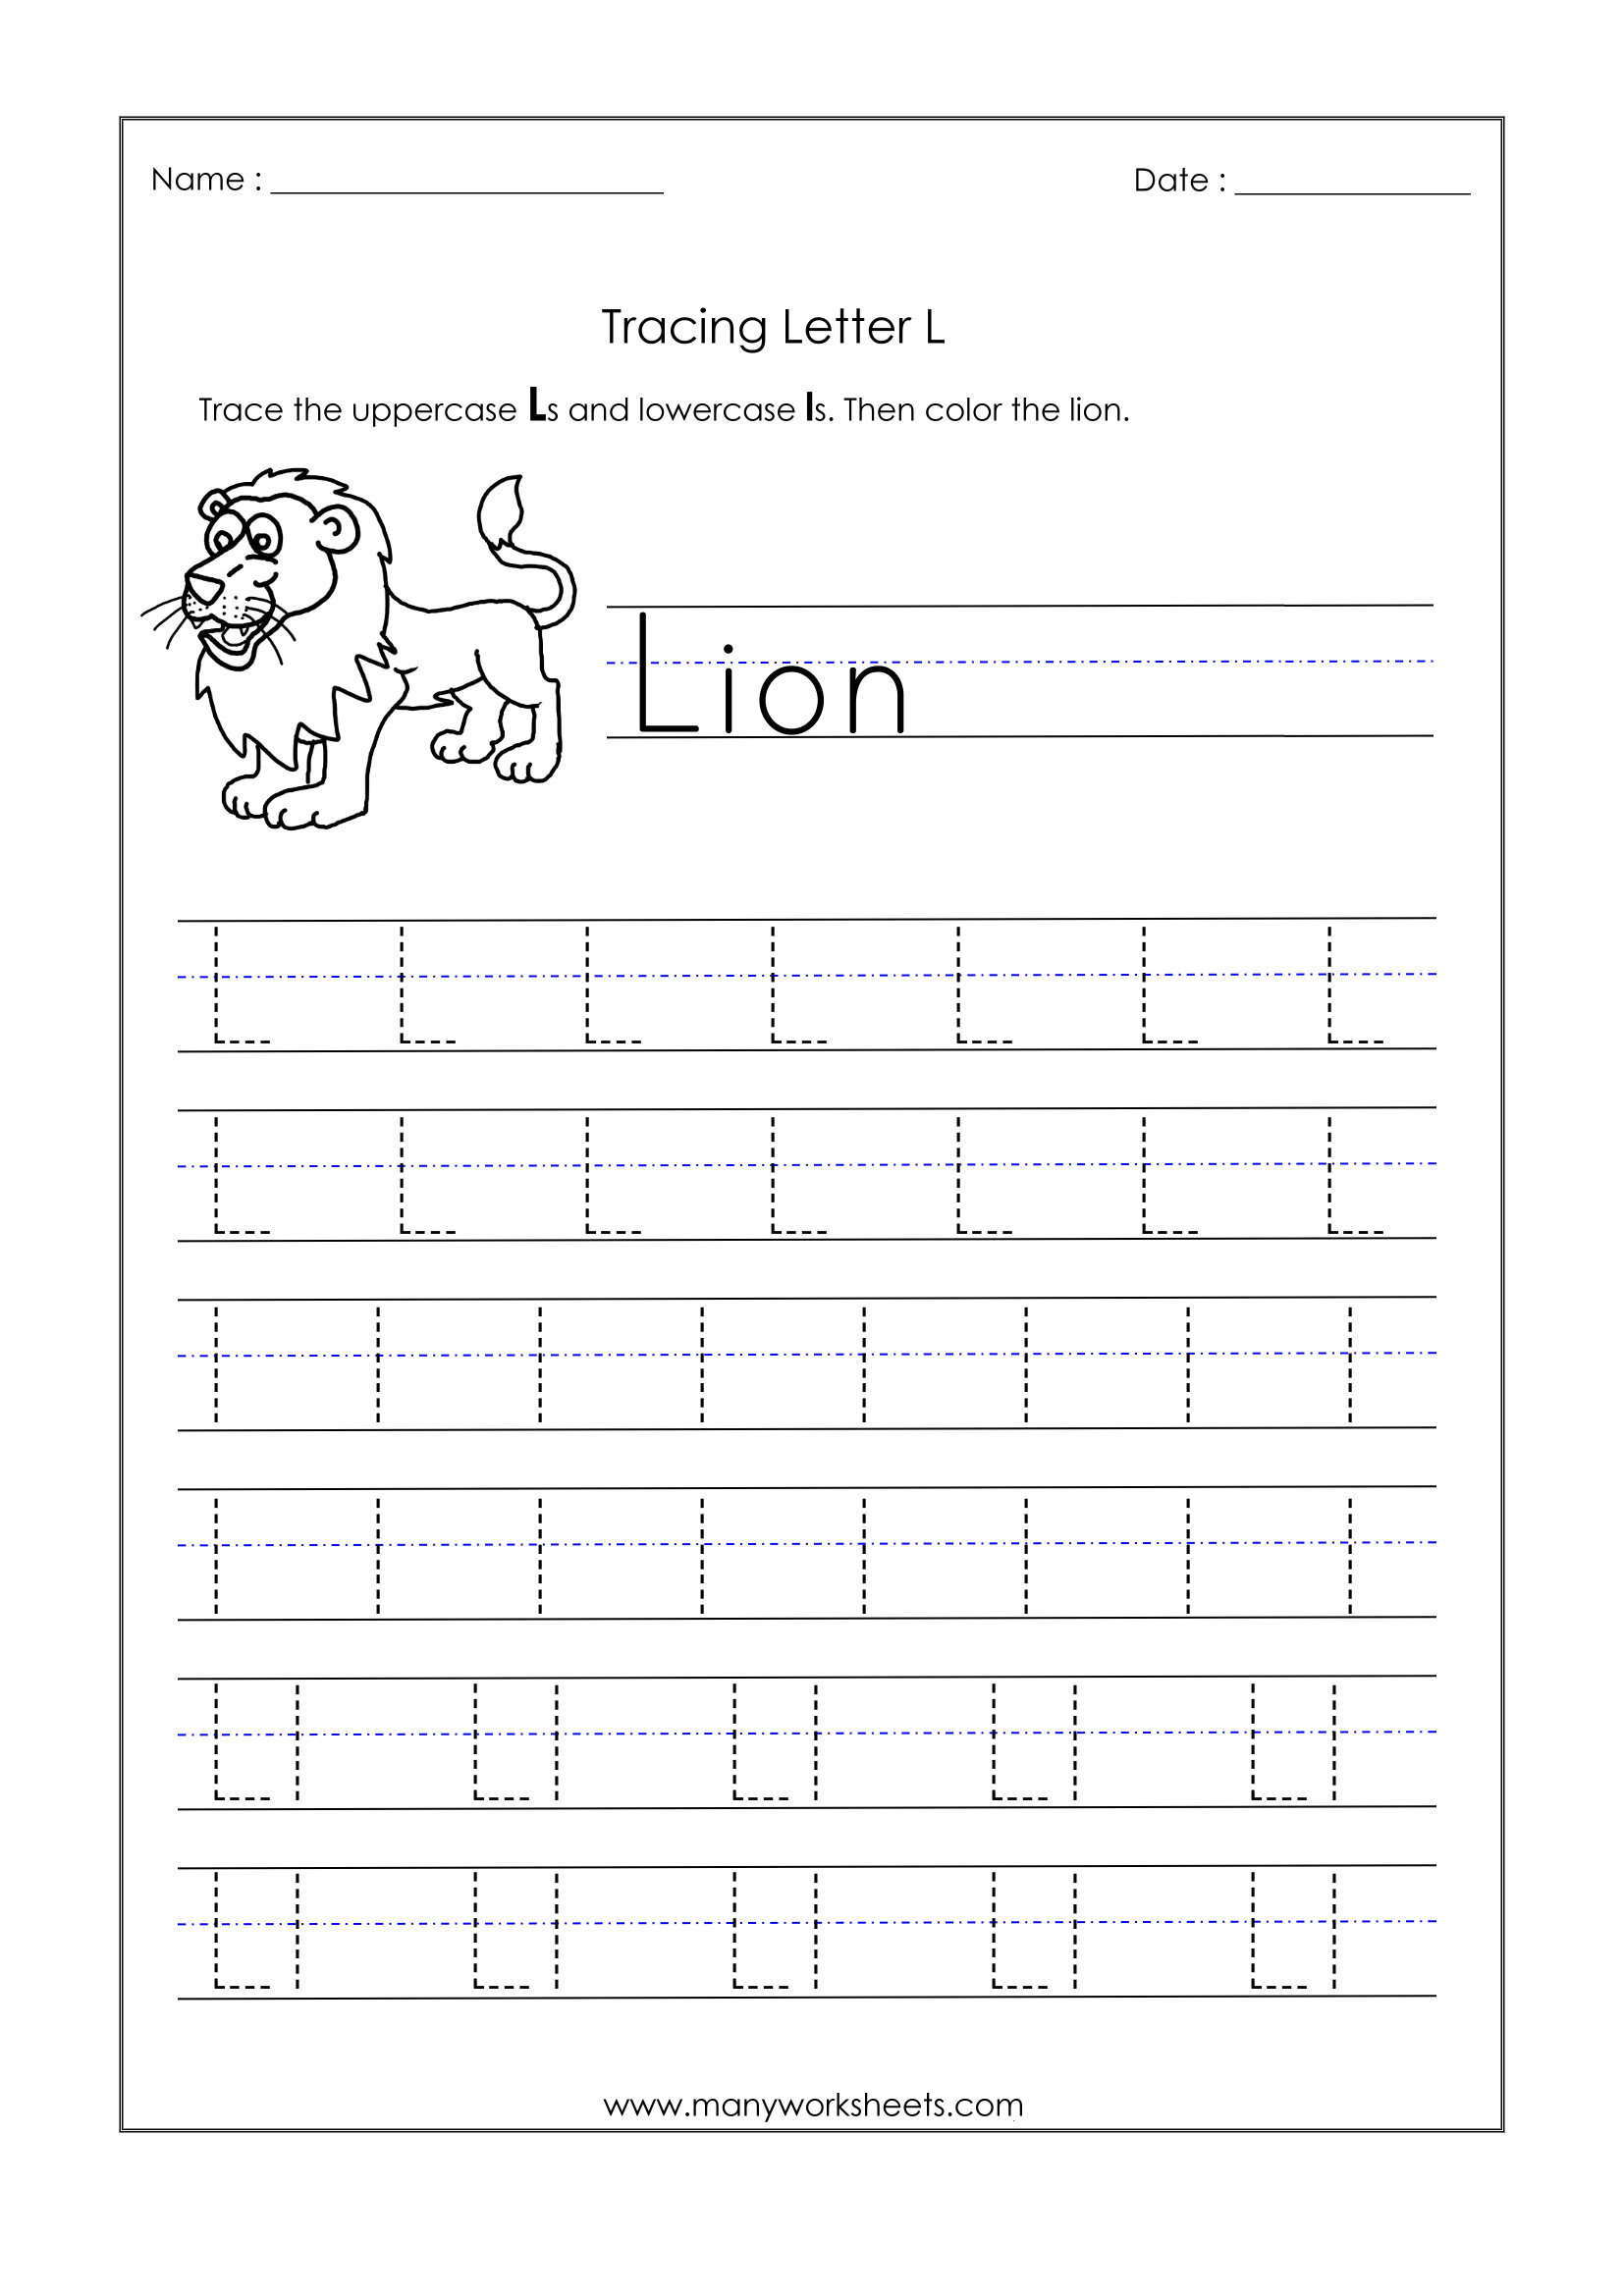 Incredible Letter Tracing Worksheets Image Ideas inside Letter L Tracing Worksheets Preschool